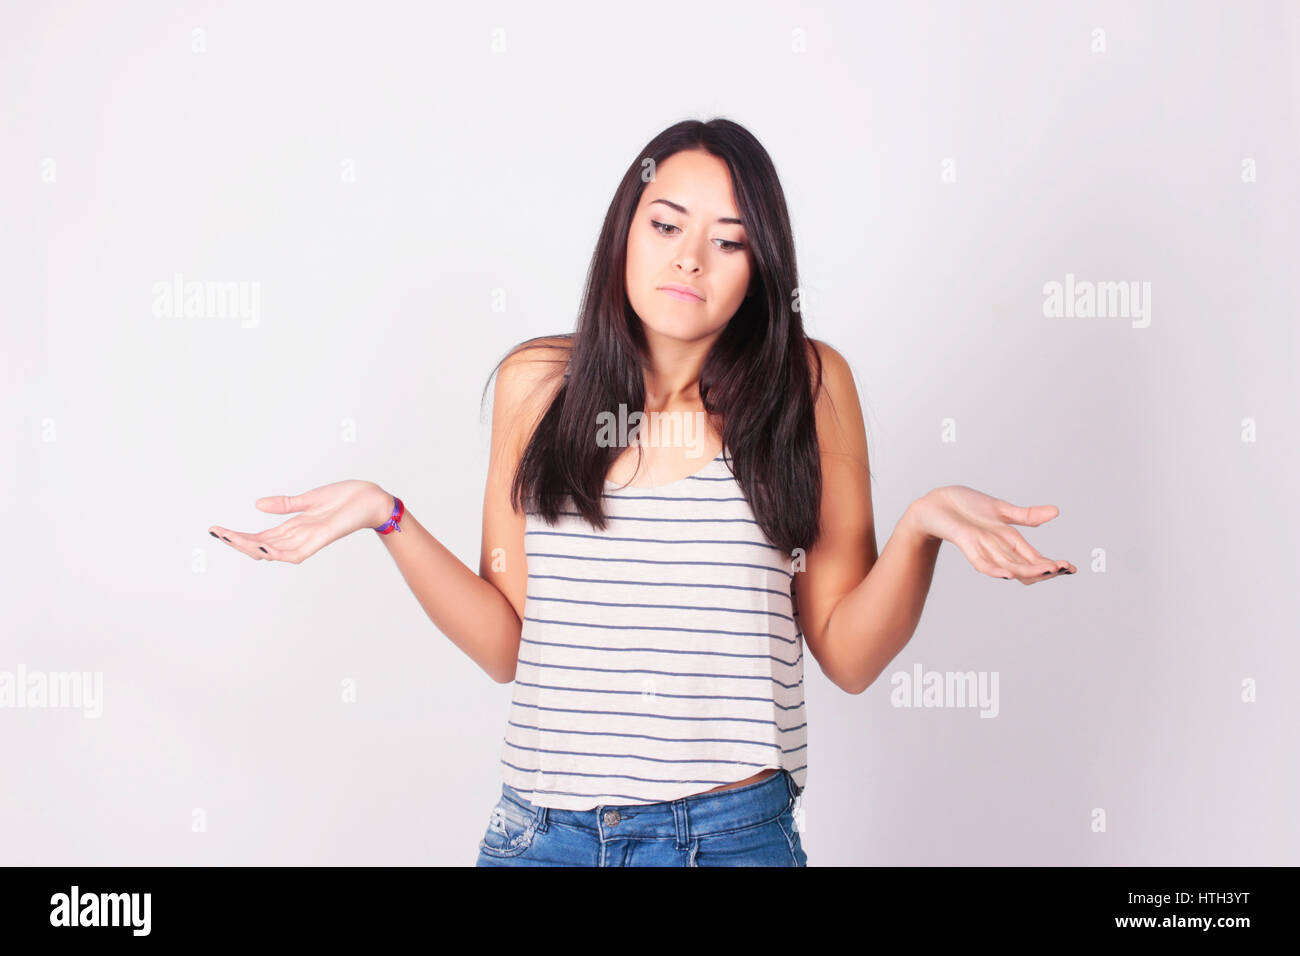 Young woman shrugging her shoulders. Portrait of a woman with clueless expression. Stock Photo